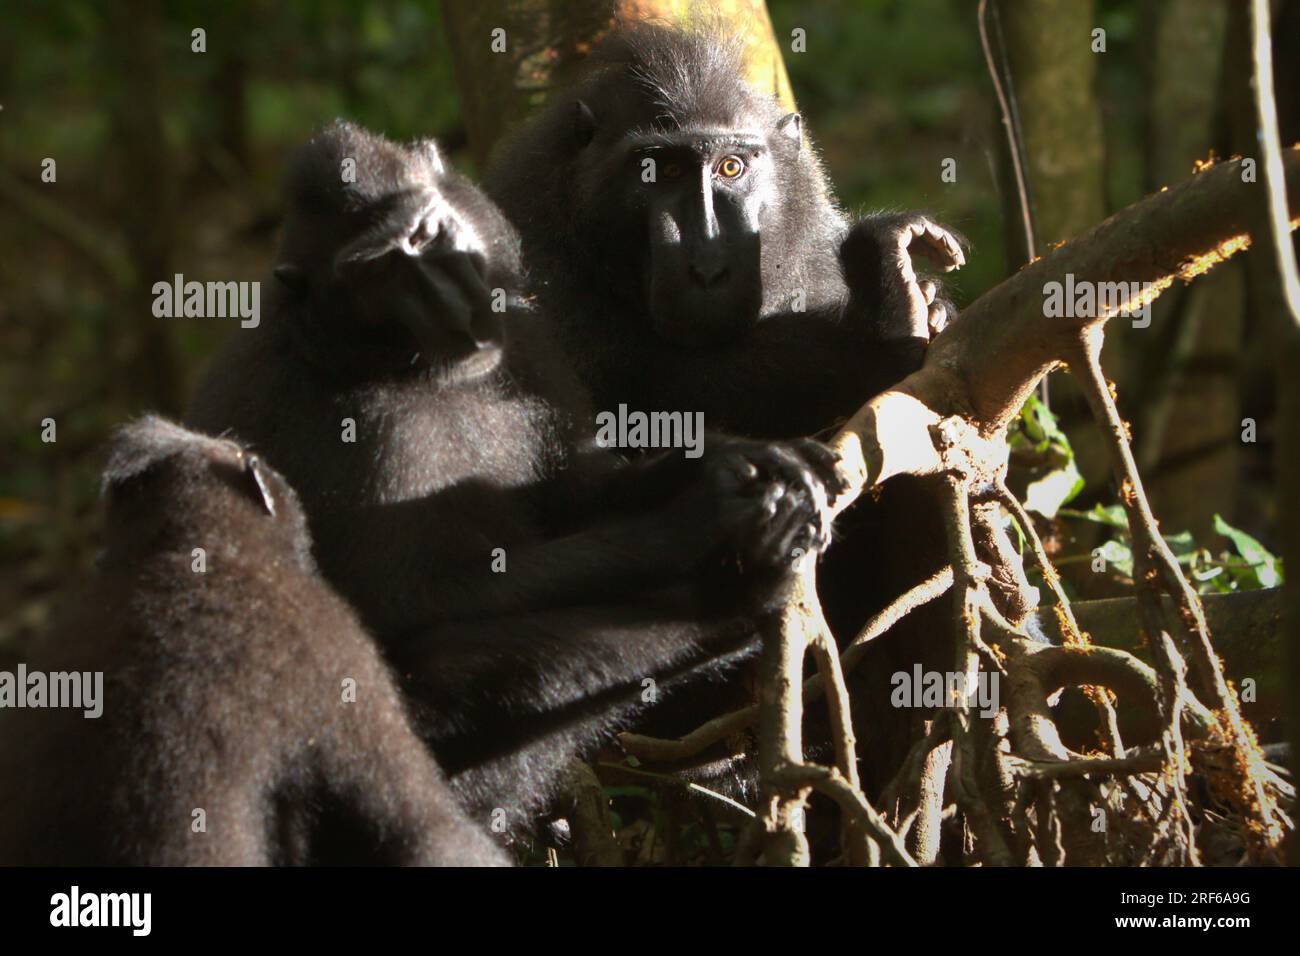 Sulawesi black-crested macaques (Macaca nigra) in Tangkoko Batuangus Nature Reserve, North Sulawesi, Indonesia. The temperature increased in Tangkoko forest, and the overall fruit abundance decreased, according to a team of scientists led by Marine Joly, as published on International Journal of Primatology in July 2023. 'Between 2012 and 2020, temperatures increased by up to 0.2 degree Celsius per year in the forest, and the overall fruit abundance decreased by 1 percent per year,” they wrote. Stock Photo